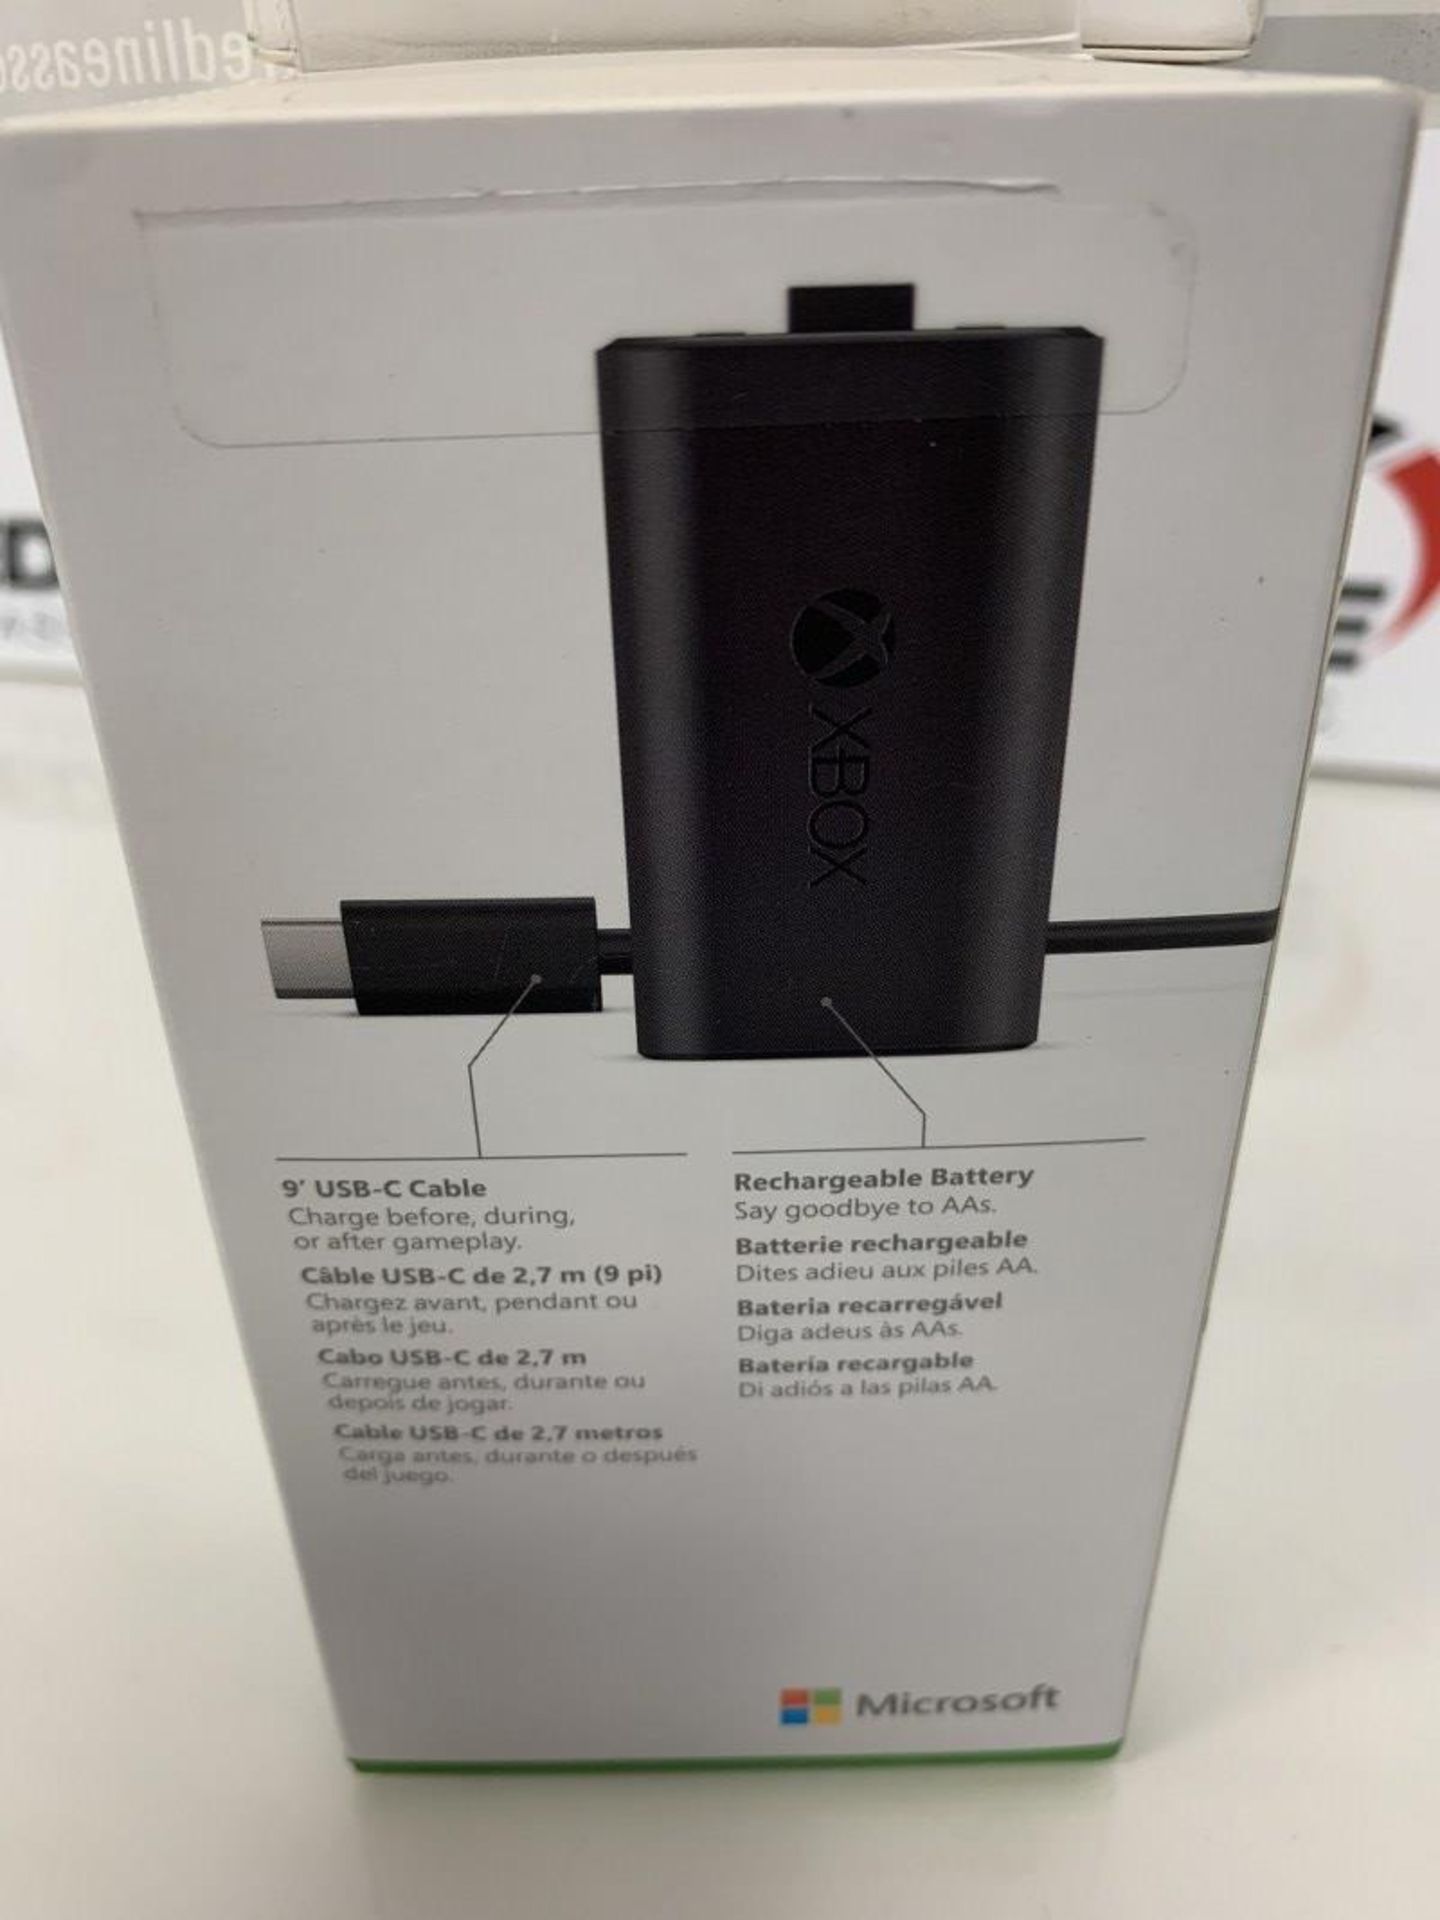 Xbox - Rechargable Battery + Usb-C Cable - Image 2 of 2